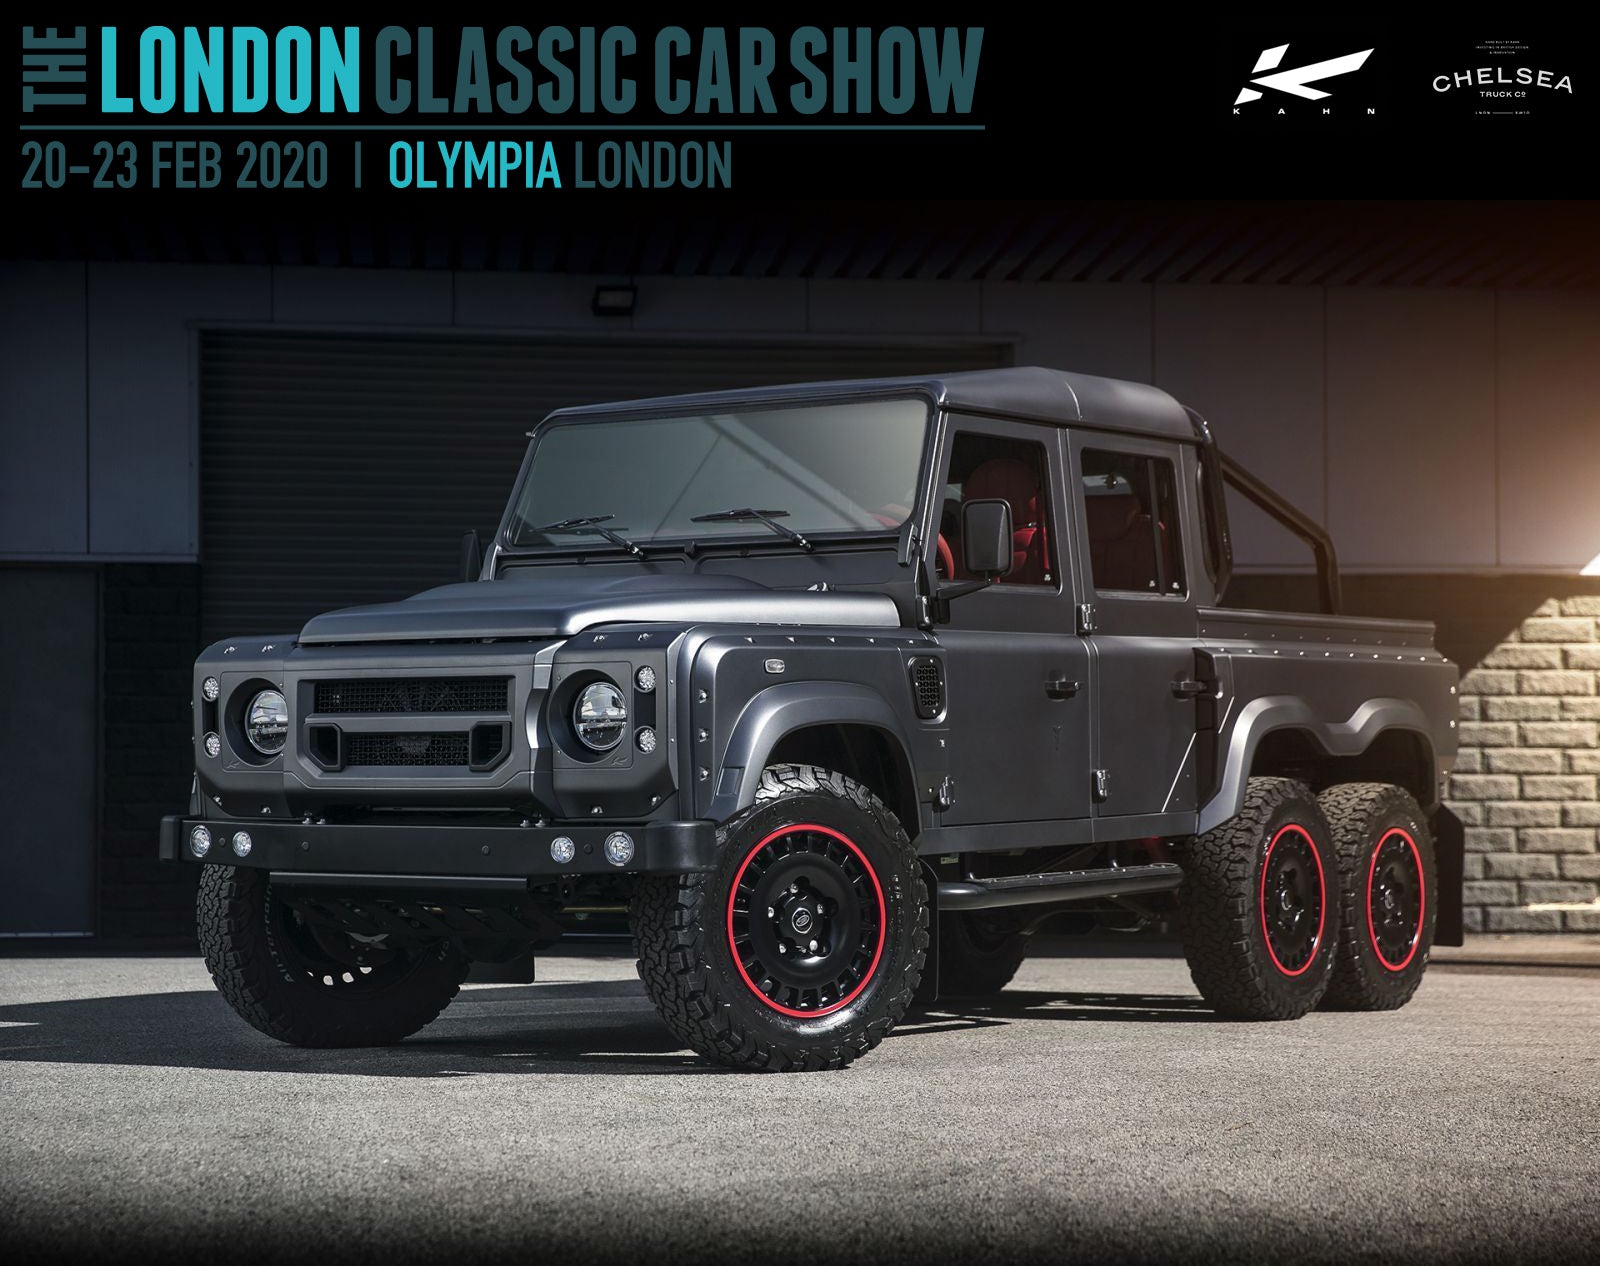 Chelsea Truck Company and Kahn Design at the London Classic Car Show